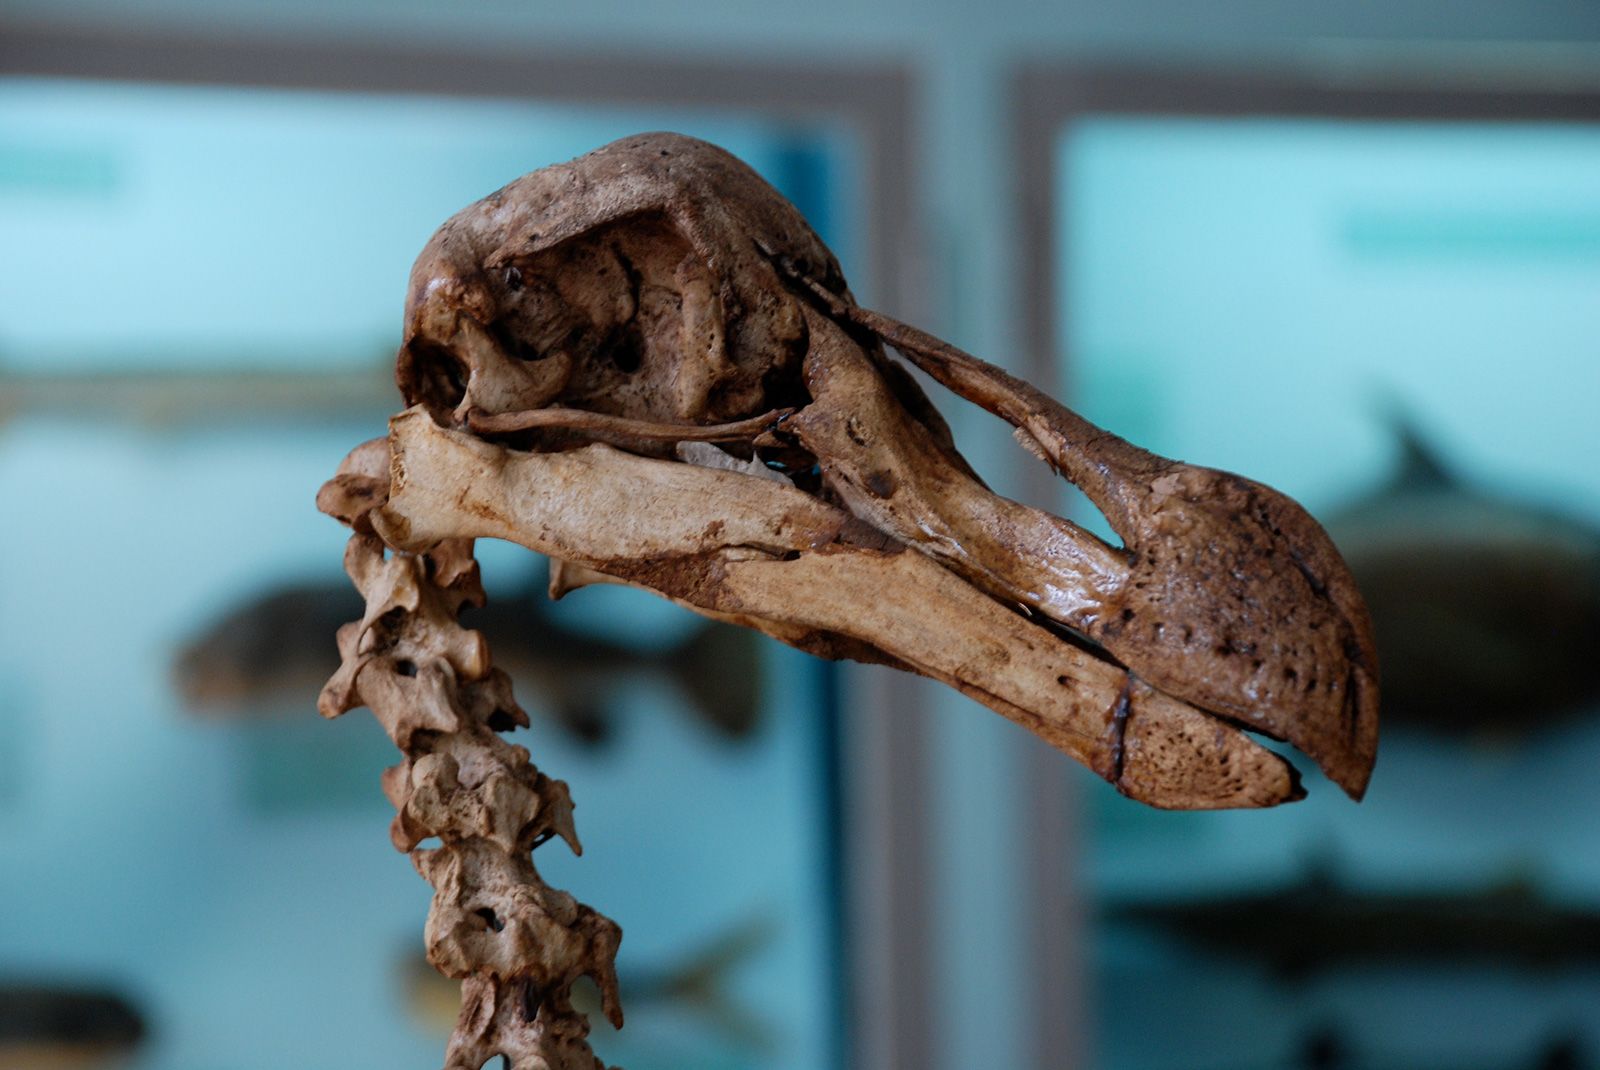 Dodo DNA discovery could lead to revival of extinct bird